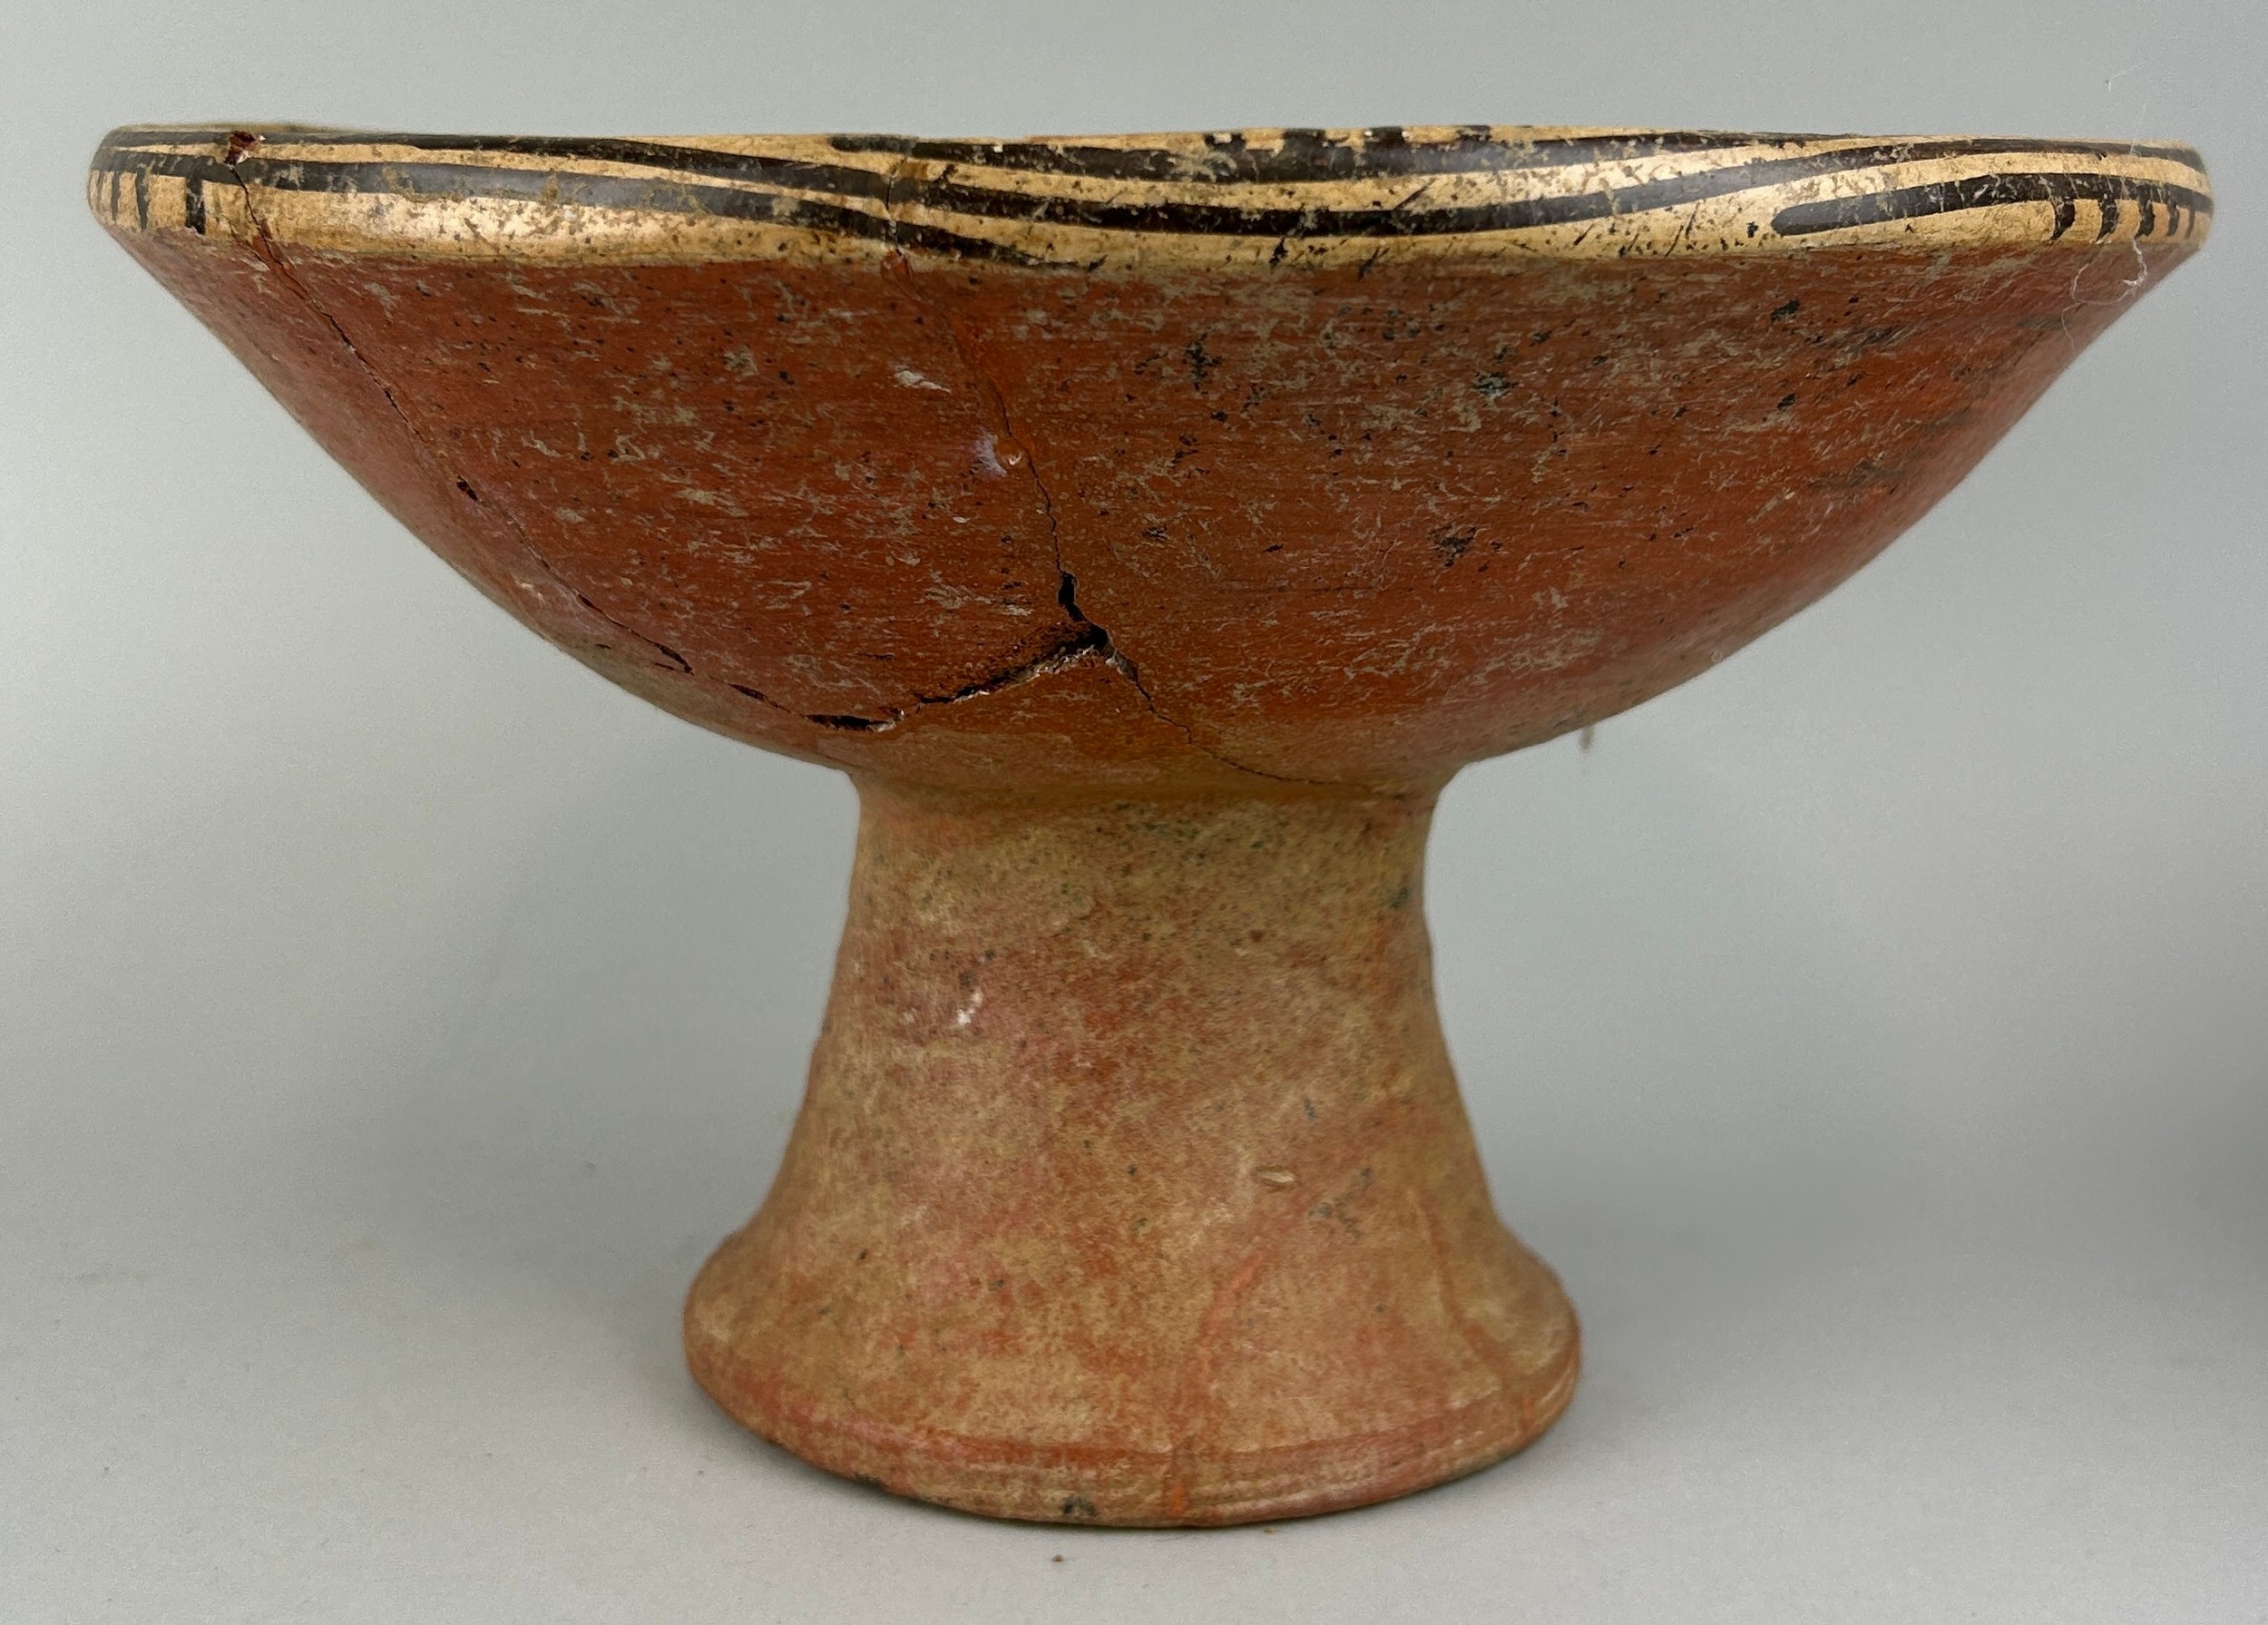 A PRE COLUMBIAN TERRACOTTA 'COCLE TAZZA' OR PEDESTAL BOWL, From Coclé Province, Panama. 26cm x - Image 4 of 5